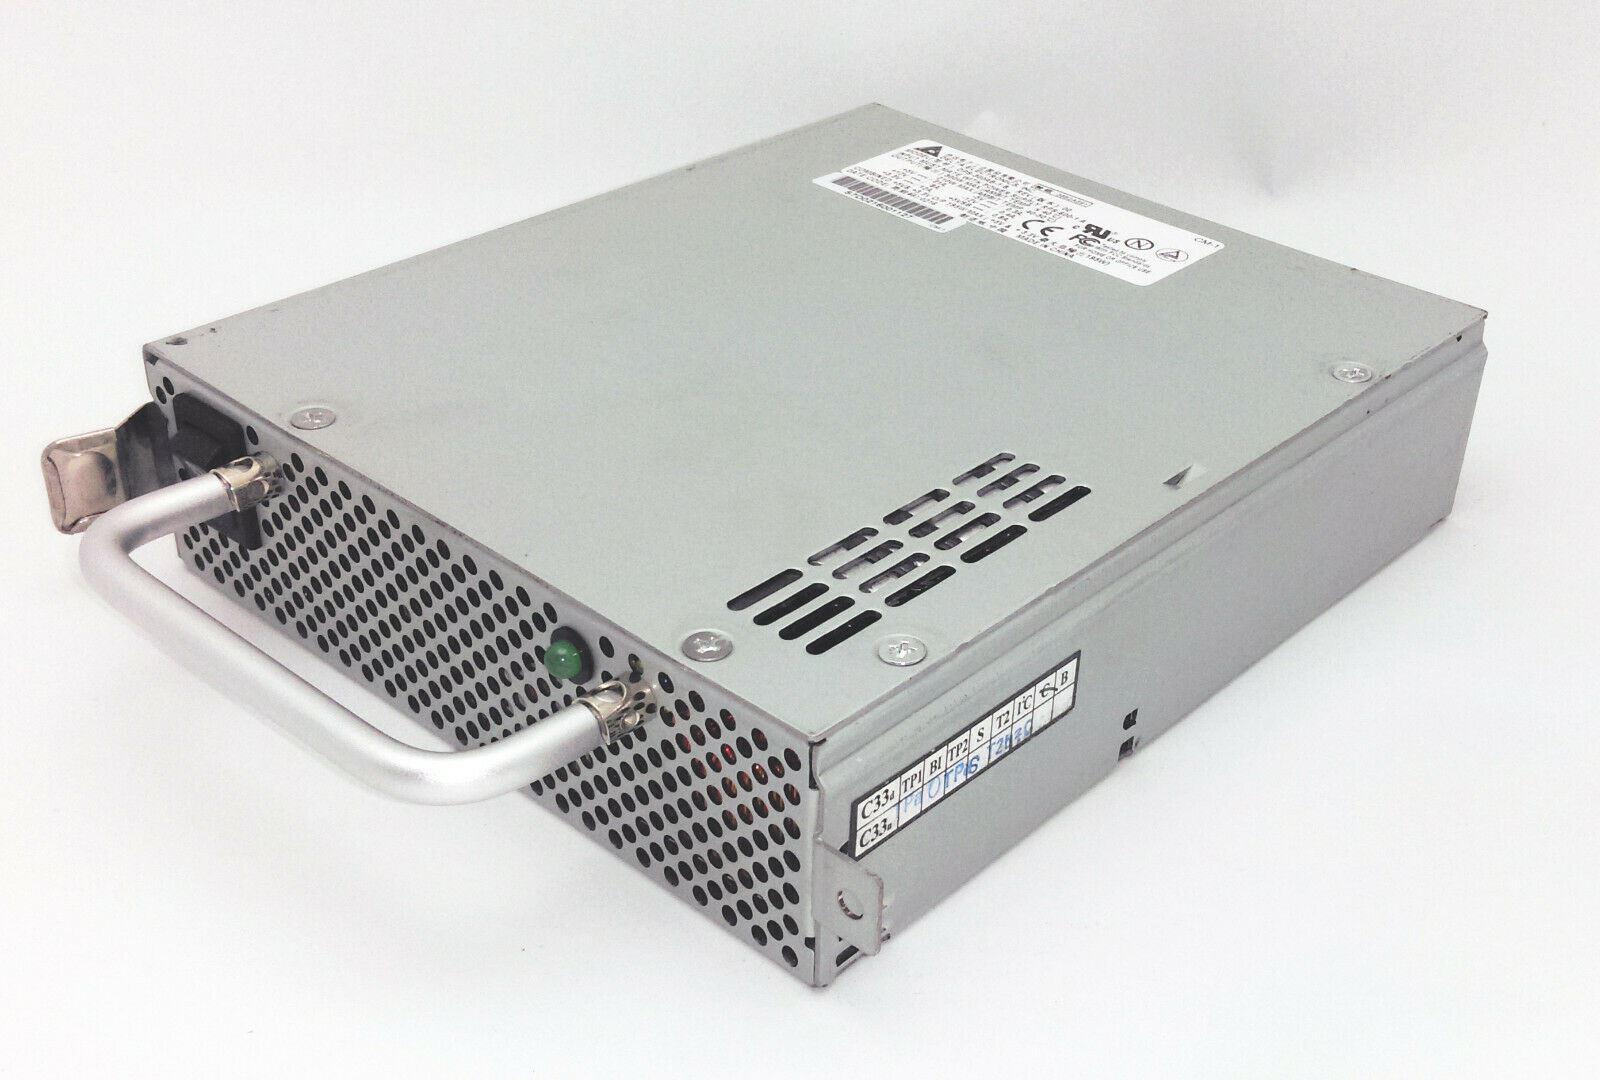 DPS 300AB 1 rps 600 1a delta rps 600 1a 195w power supply